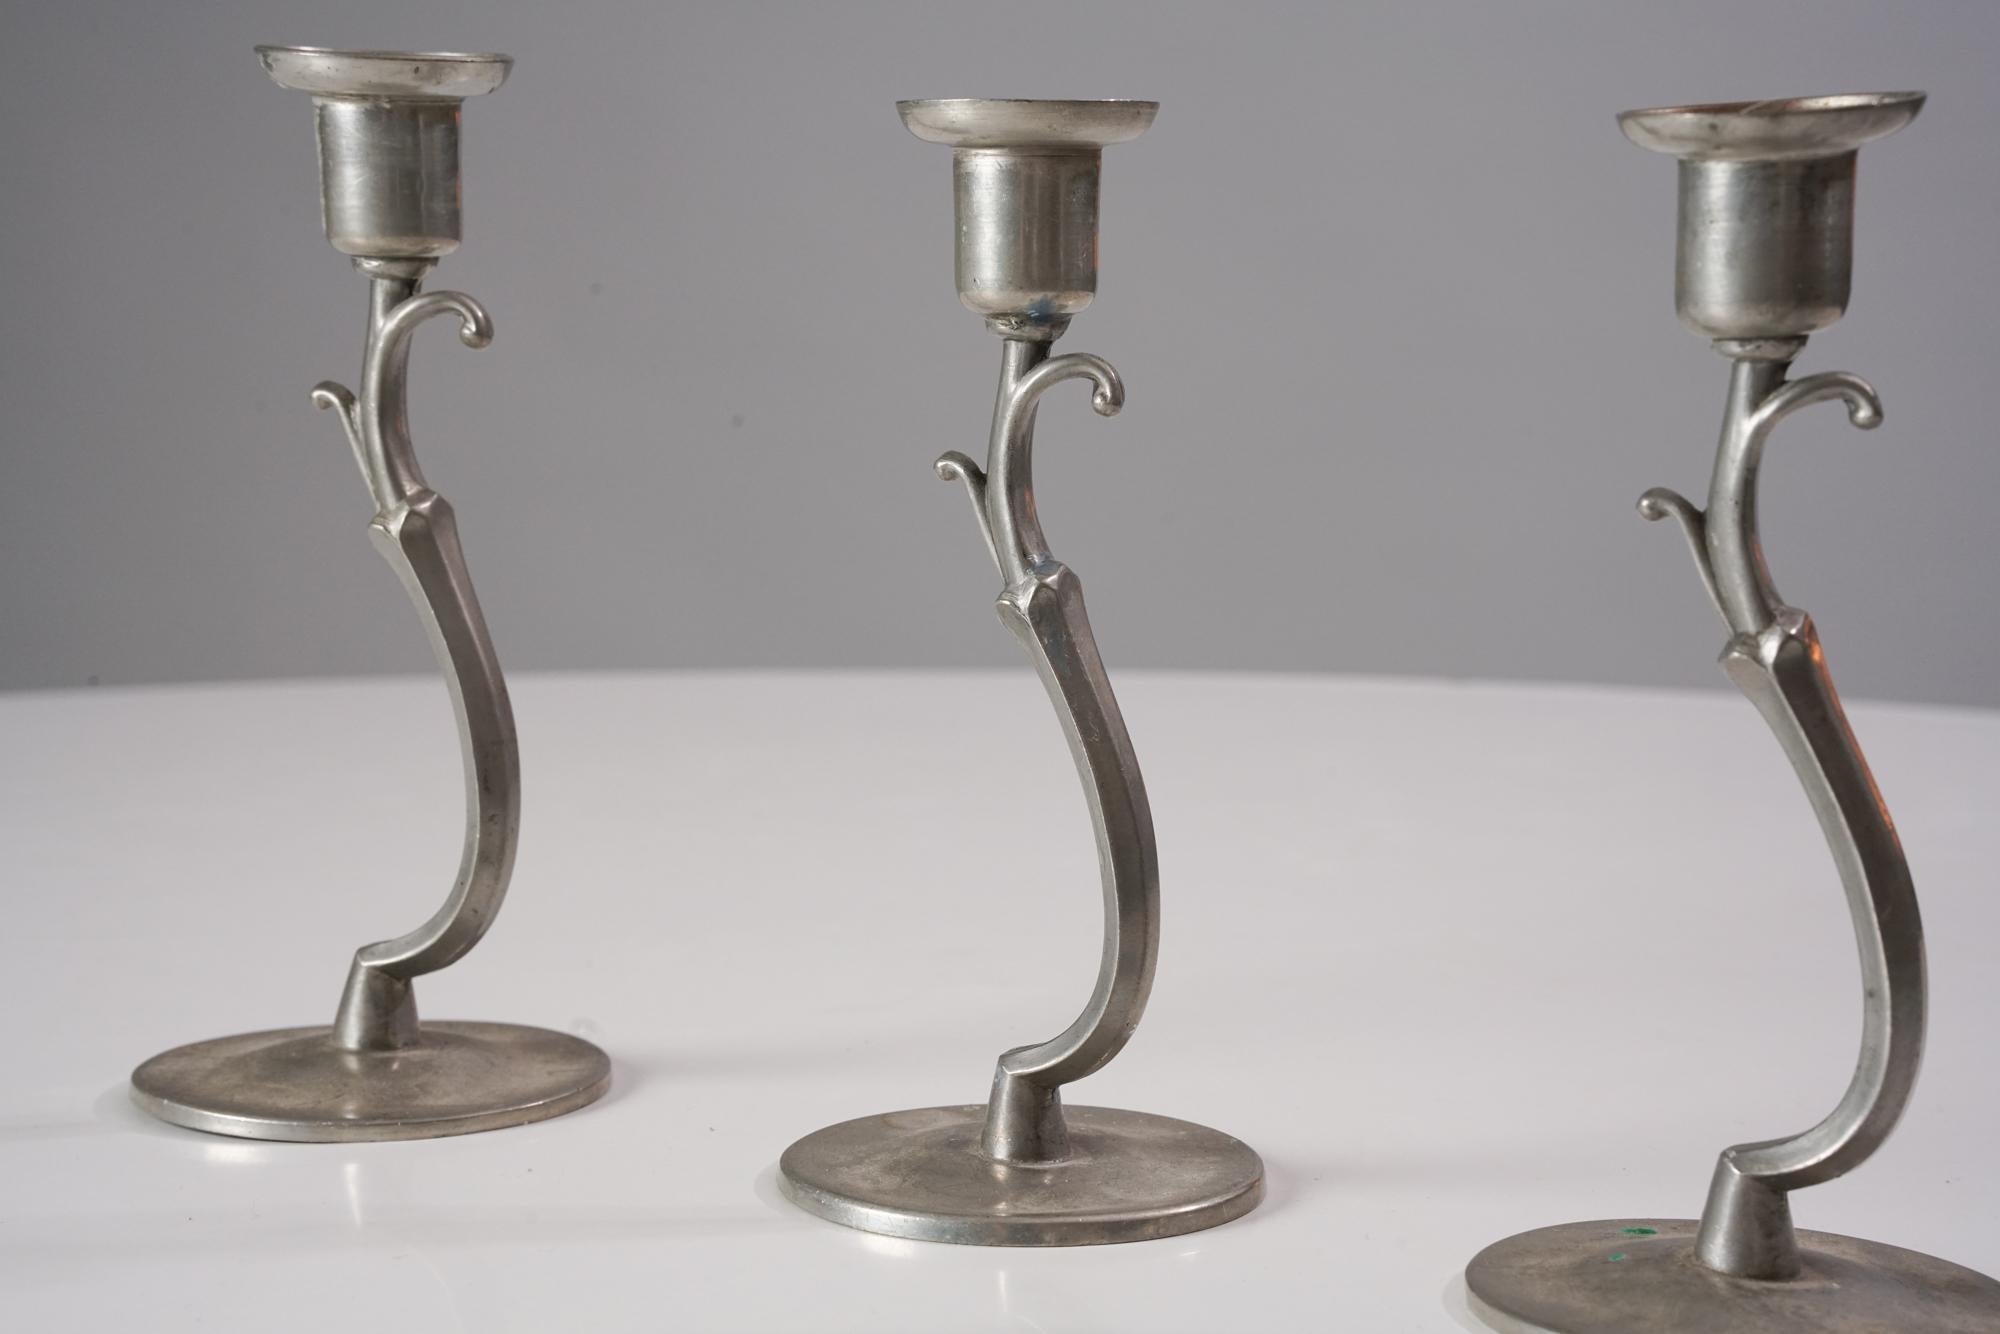 Set of three model 8023 candlesticks by Paavo Tynell for Taito Oy from the 1920/1930s. Tin. Marked on the bottom. Good vintage condition, patina consistent with age and use. The candlesticks are sold as a set. 

Paavo Viljo Tynell was a Finnish